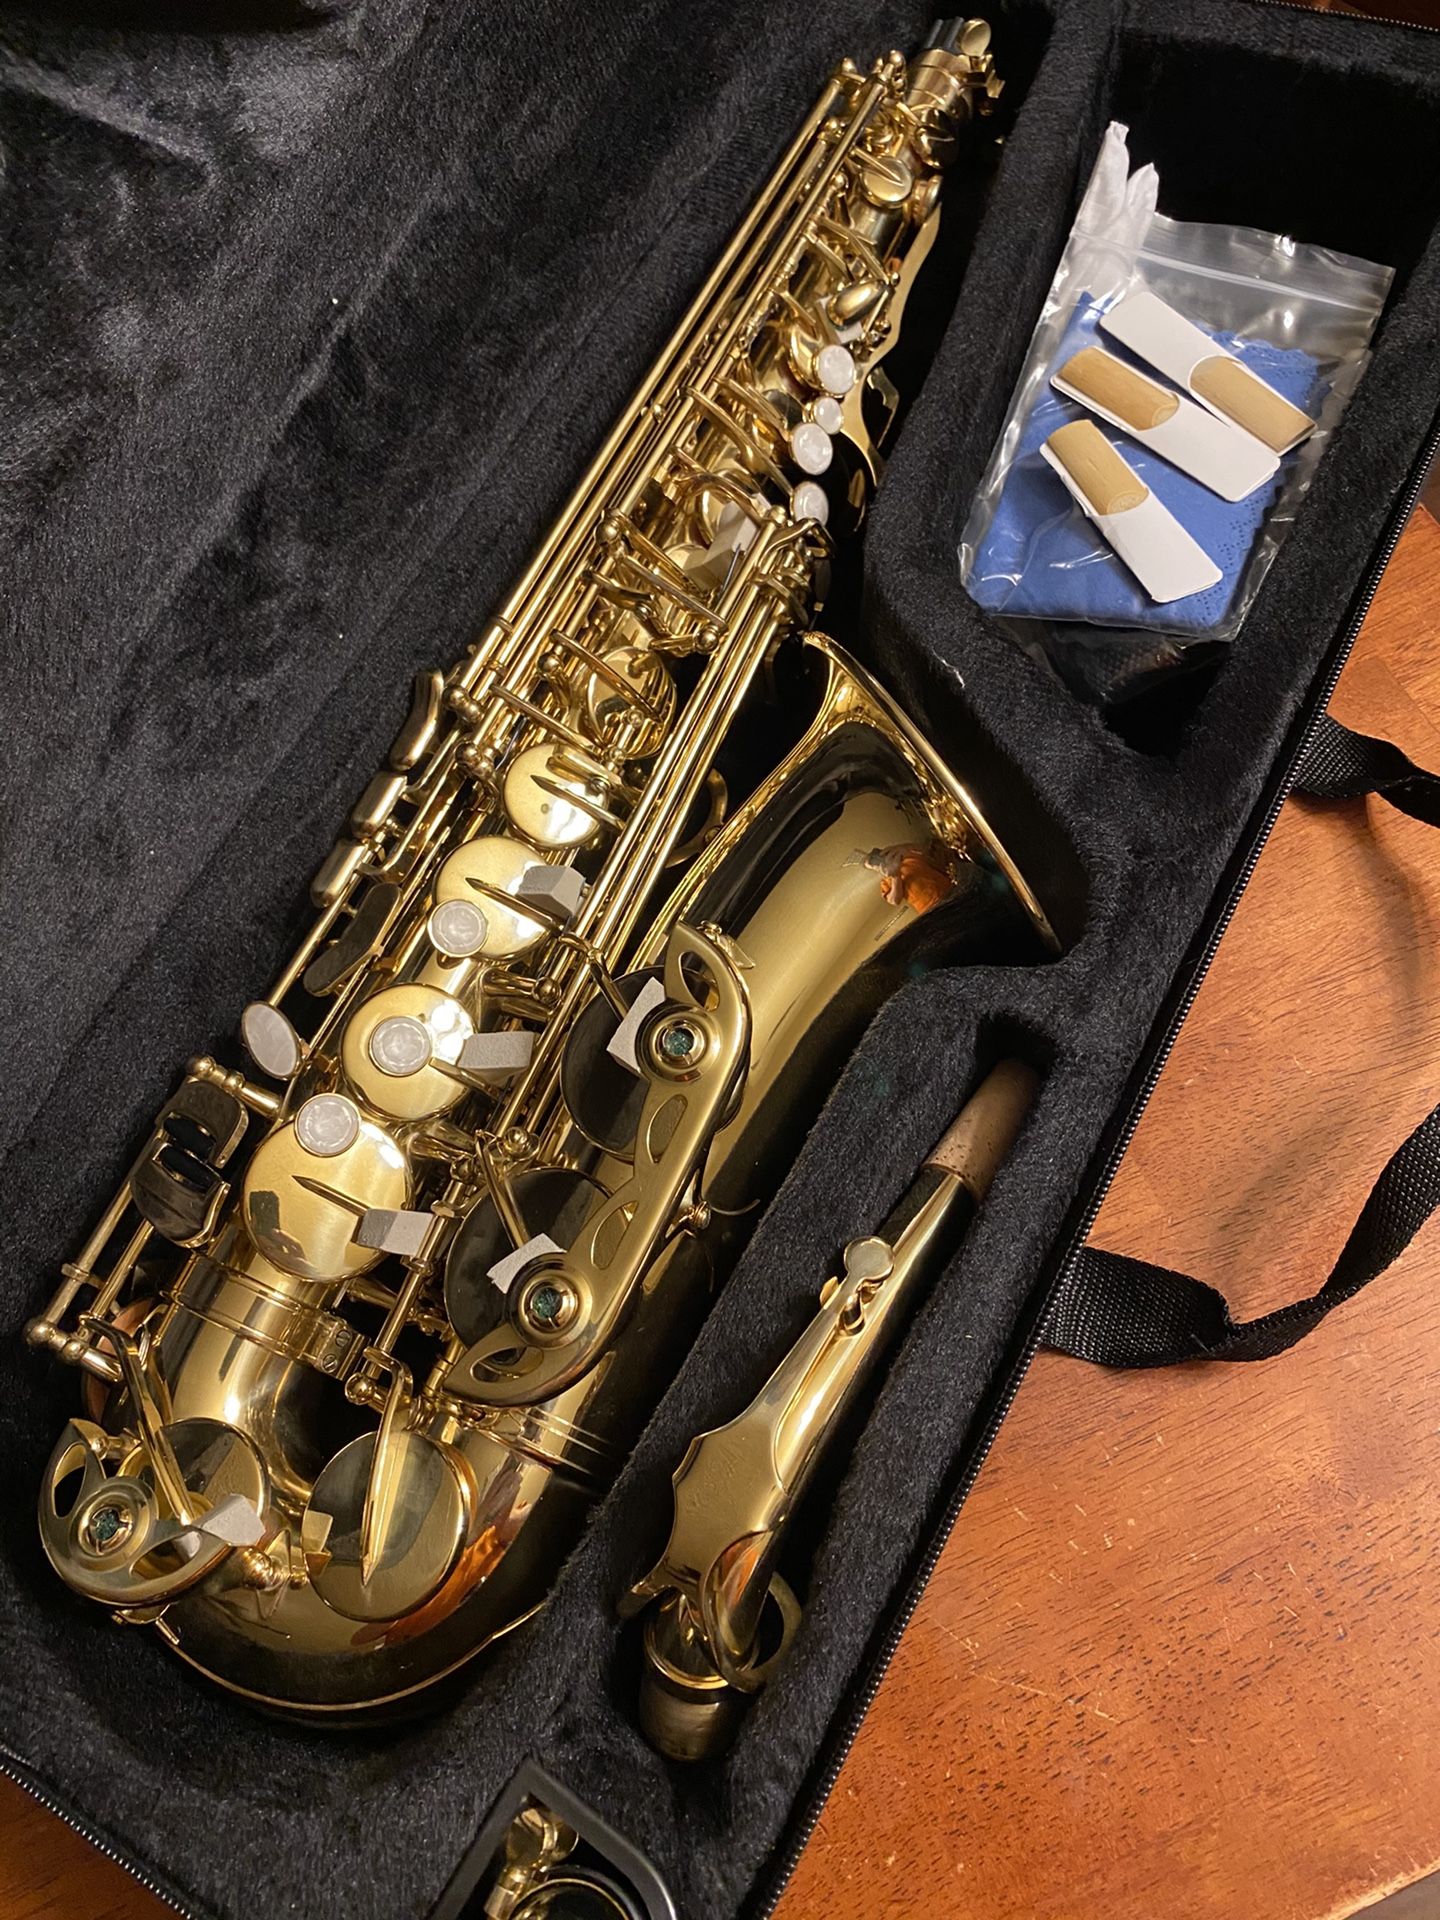 Alto Saxophone with New Set of Reeds Excellent Condition $350 Firm